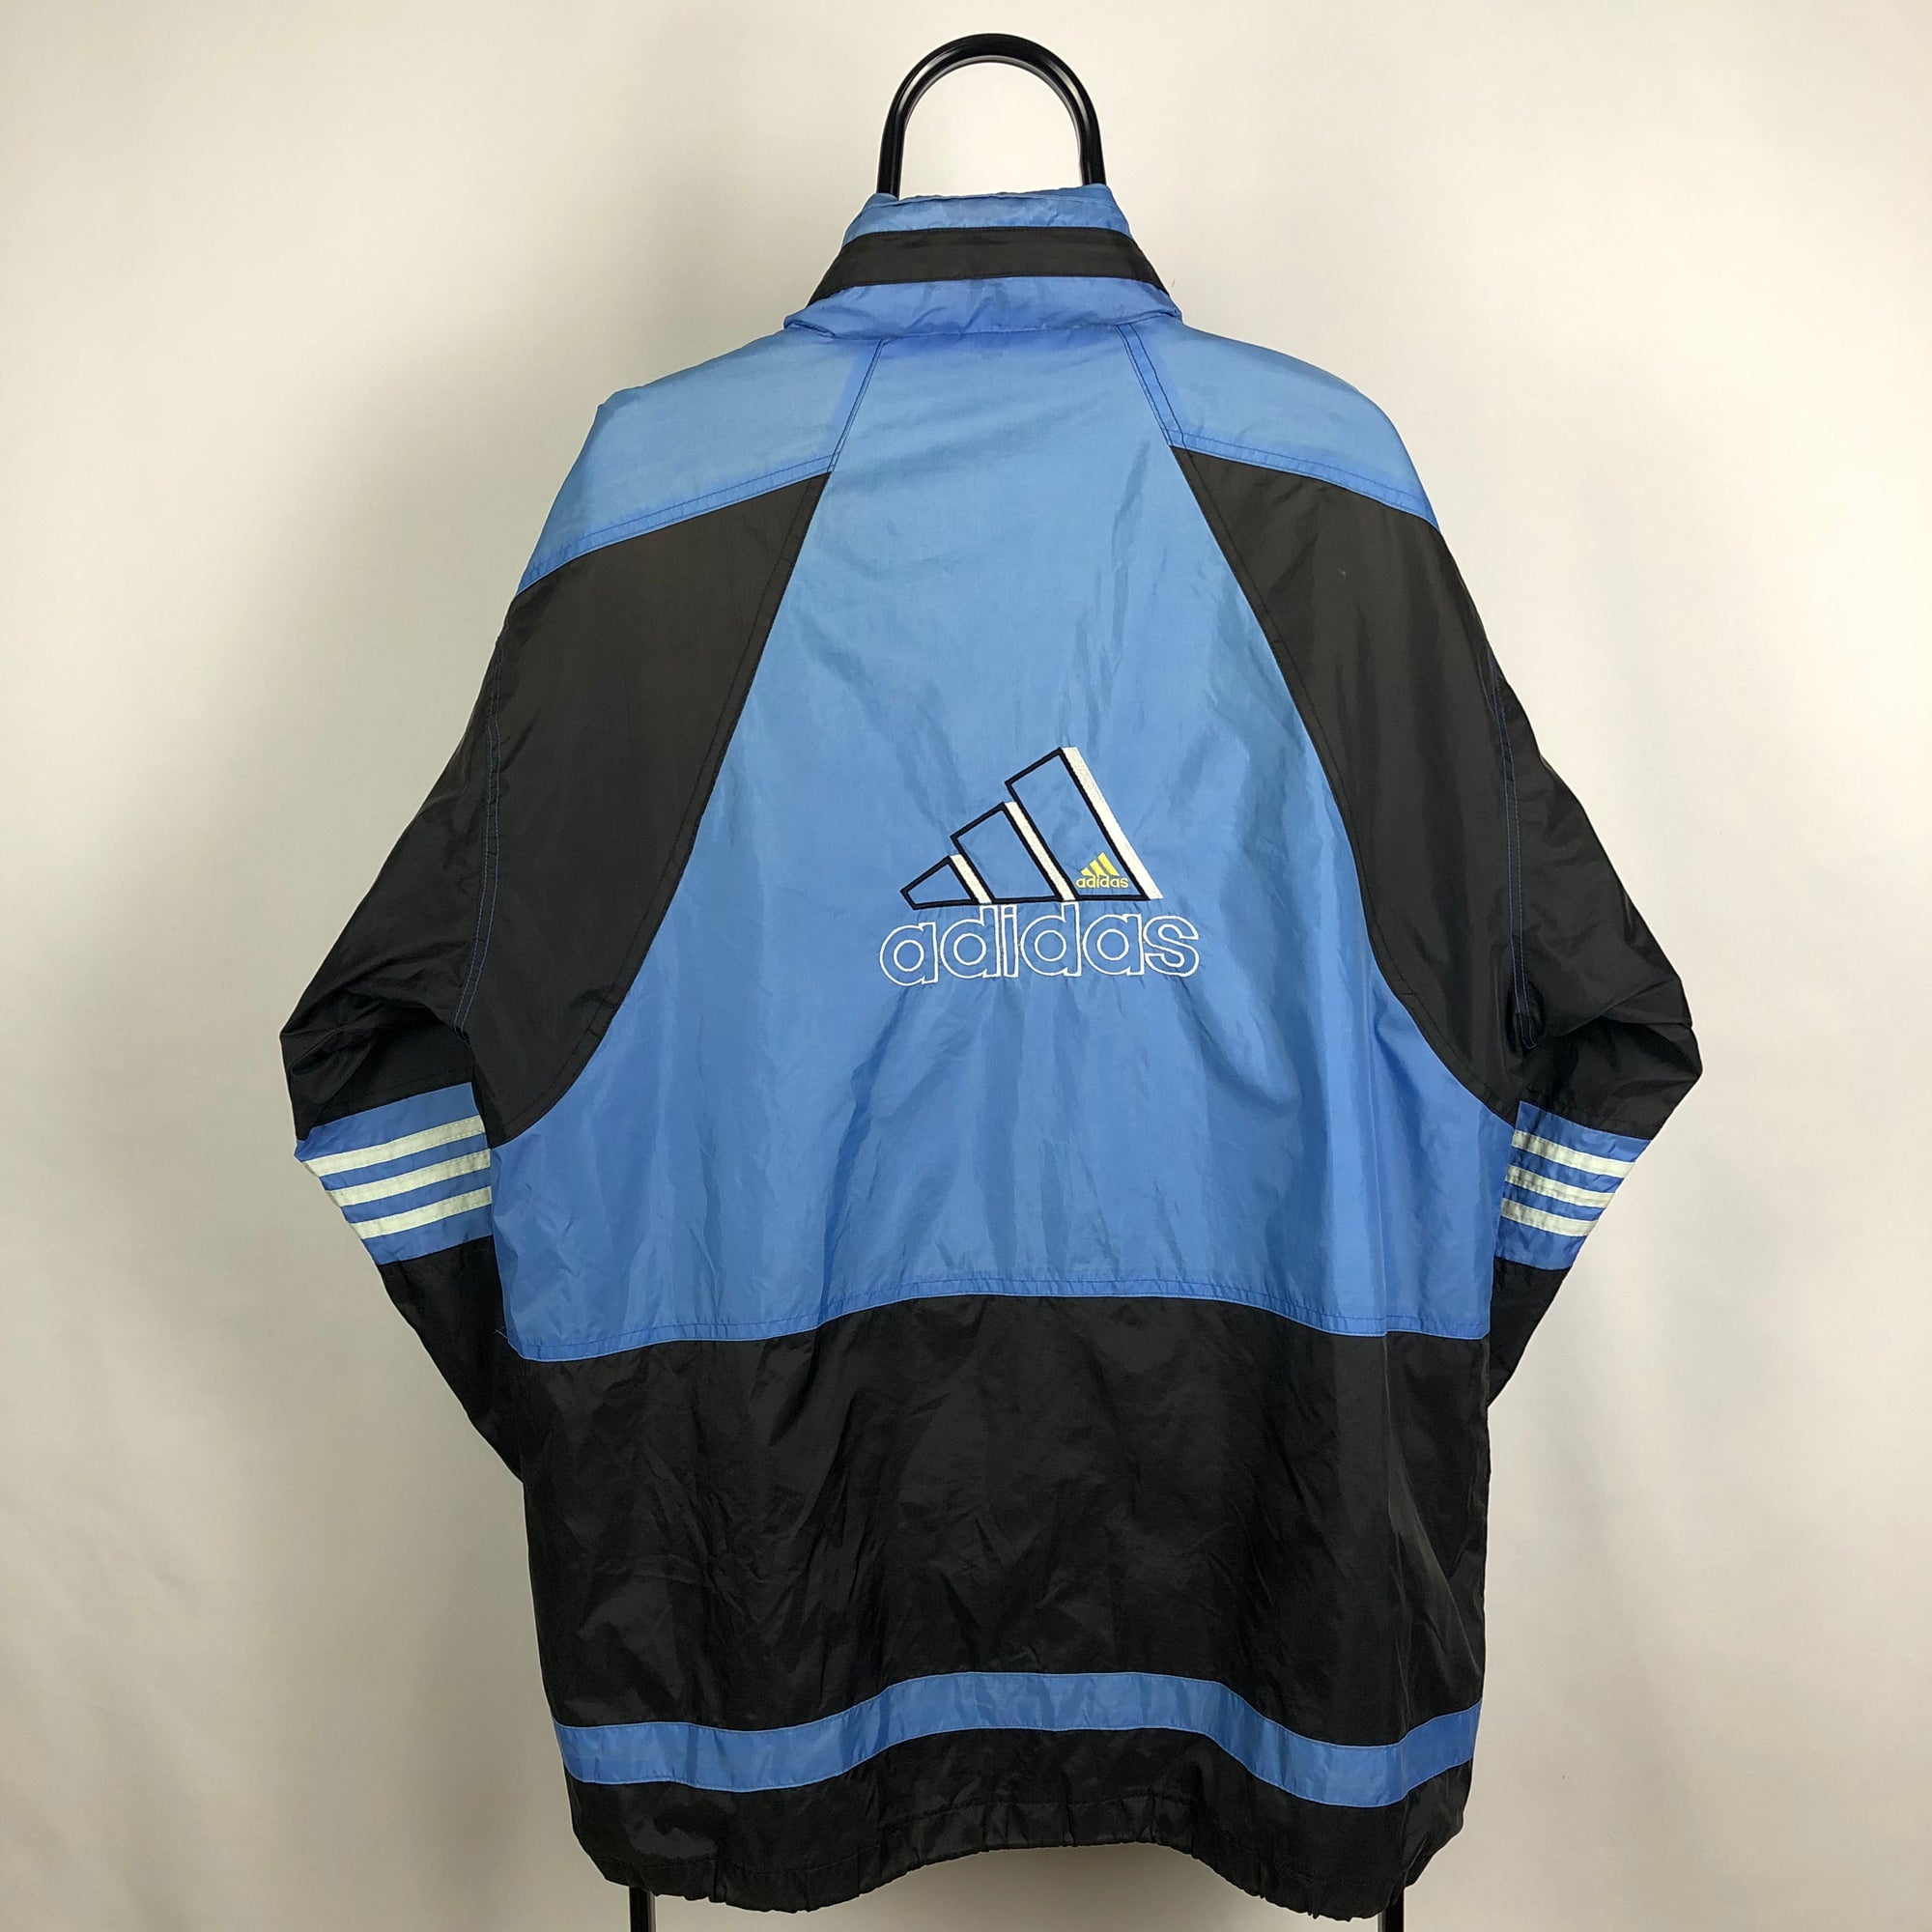 Vintage Adidas Track Jacket in Baby Blue - Men's Large/Women's XL